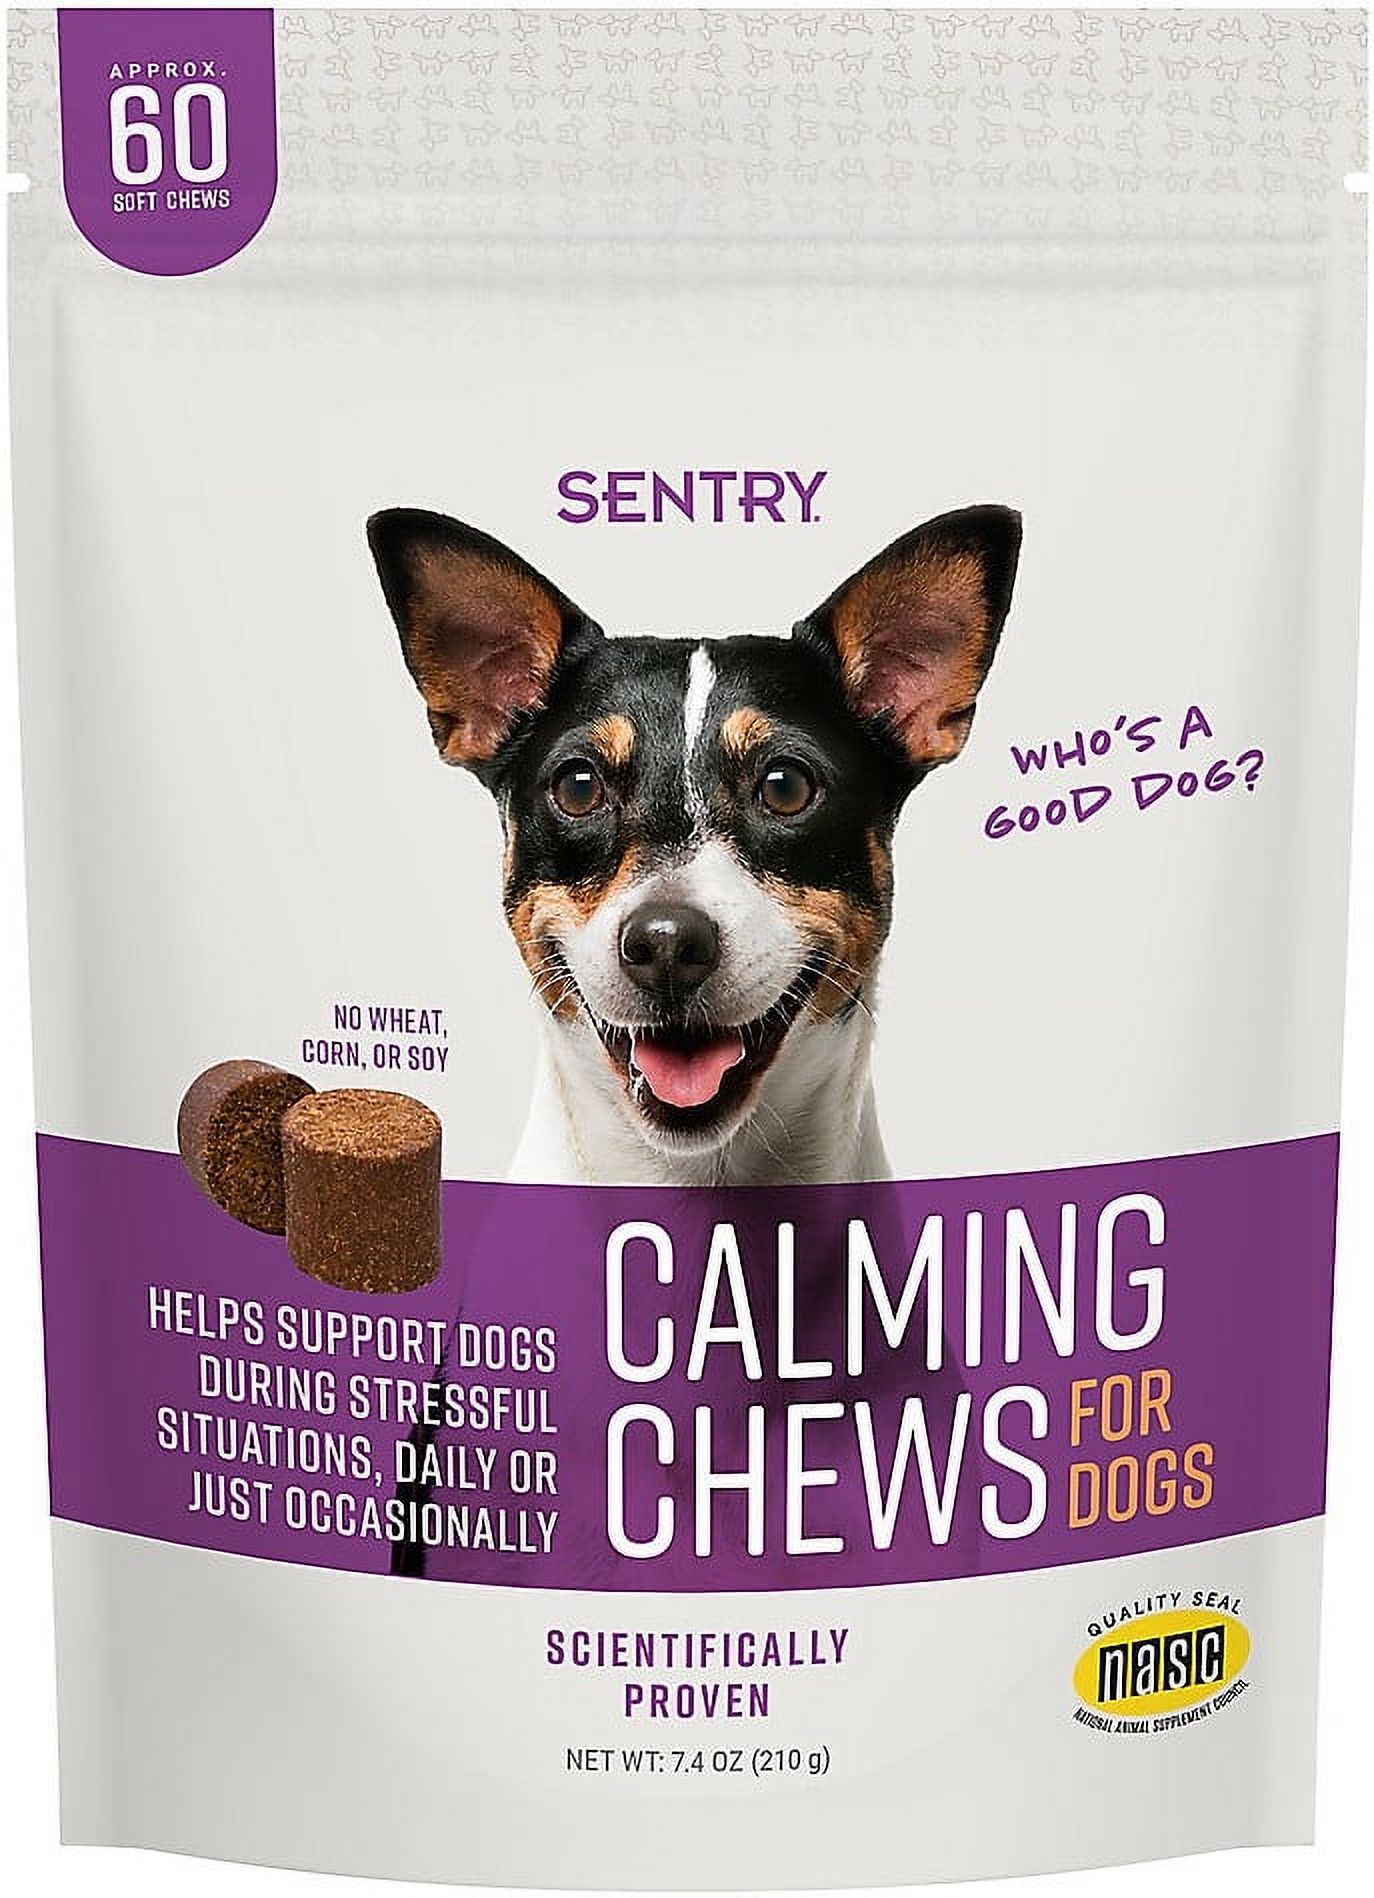 SENTRY Calming Chews for Dogs, 60 Count - image 1 of 8